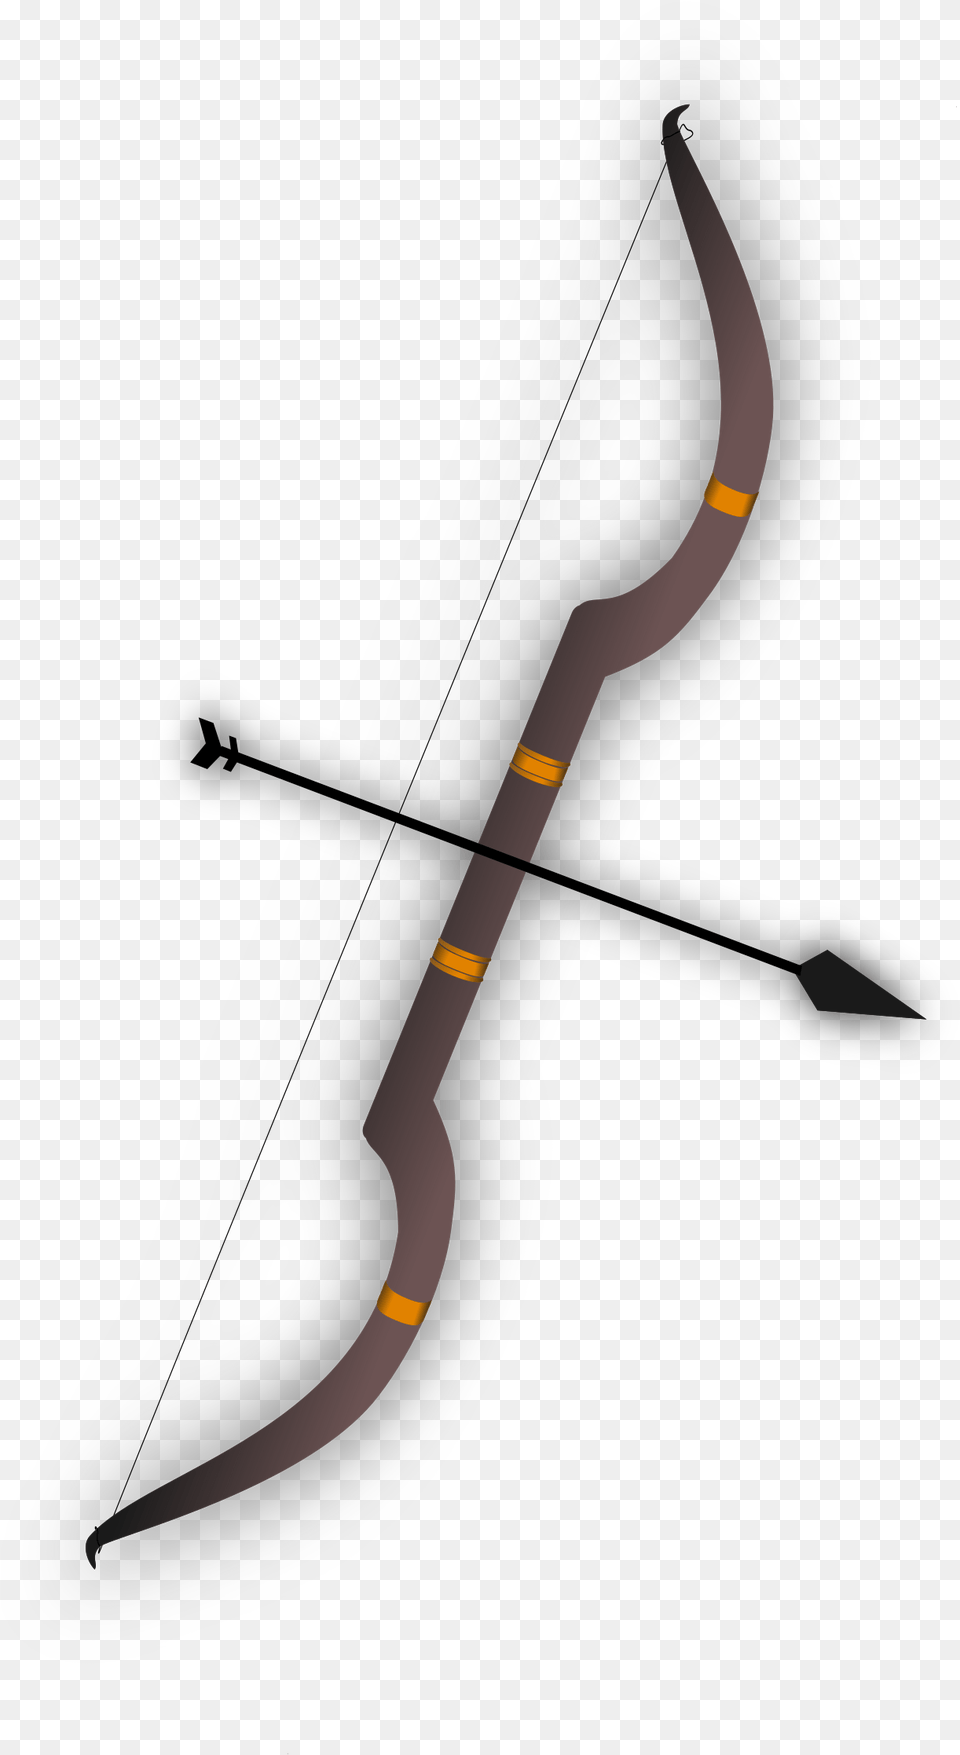 Archery Arrow Bow And Arrow Of Rama, Sword, Weapon, Blade, Dagger Free Transparent Png